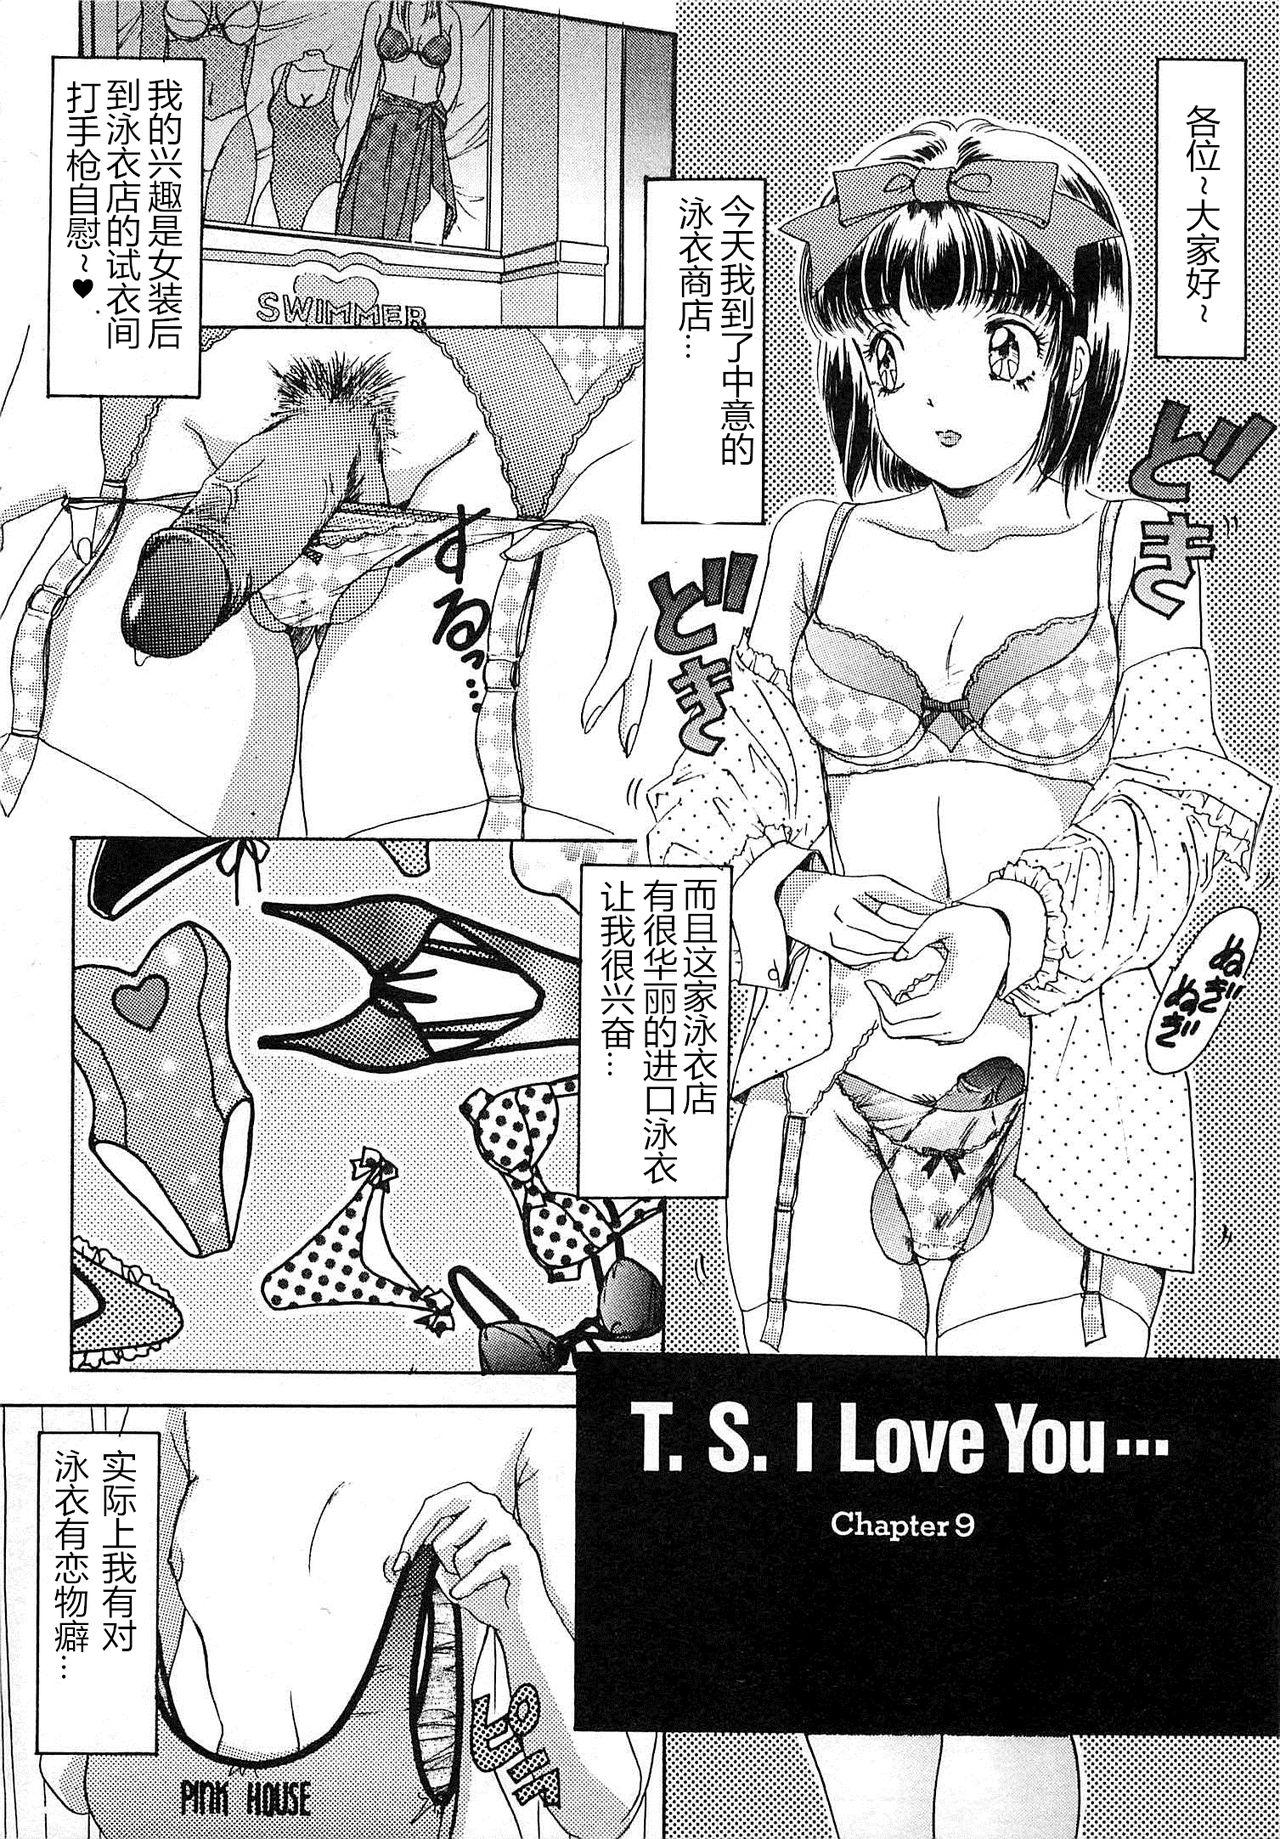 T.S. I LOVE YOU chapter 09 1